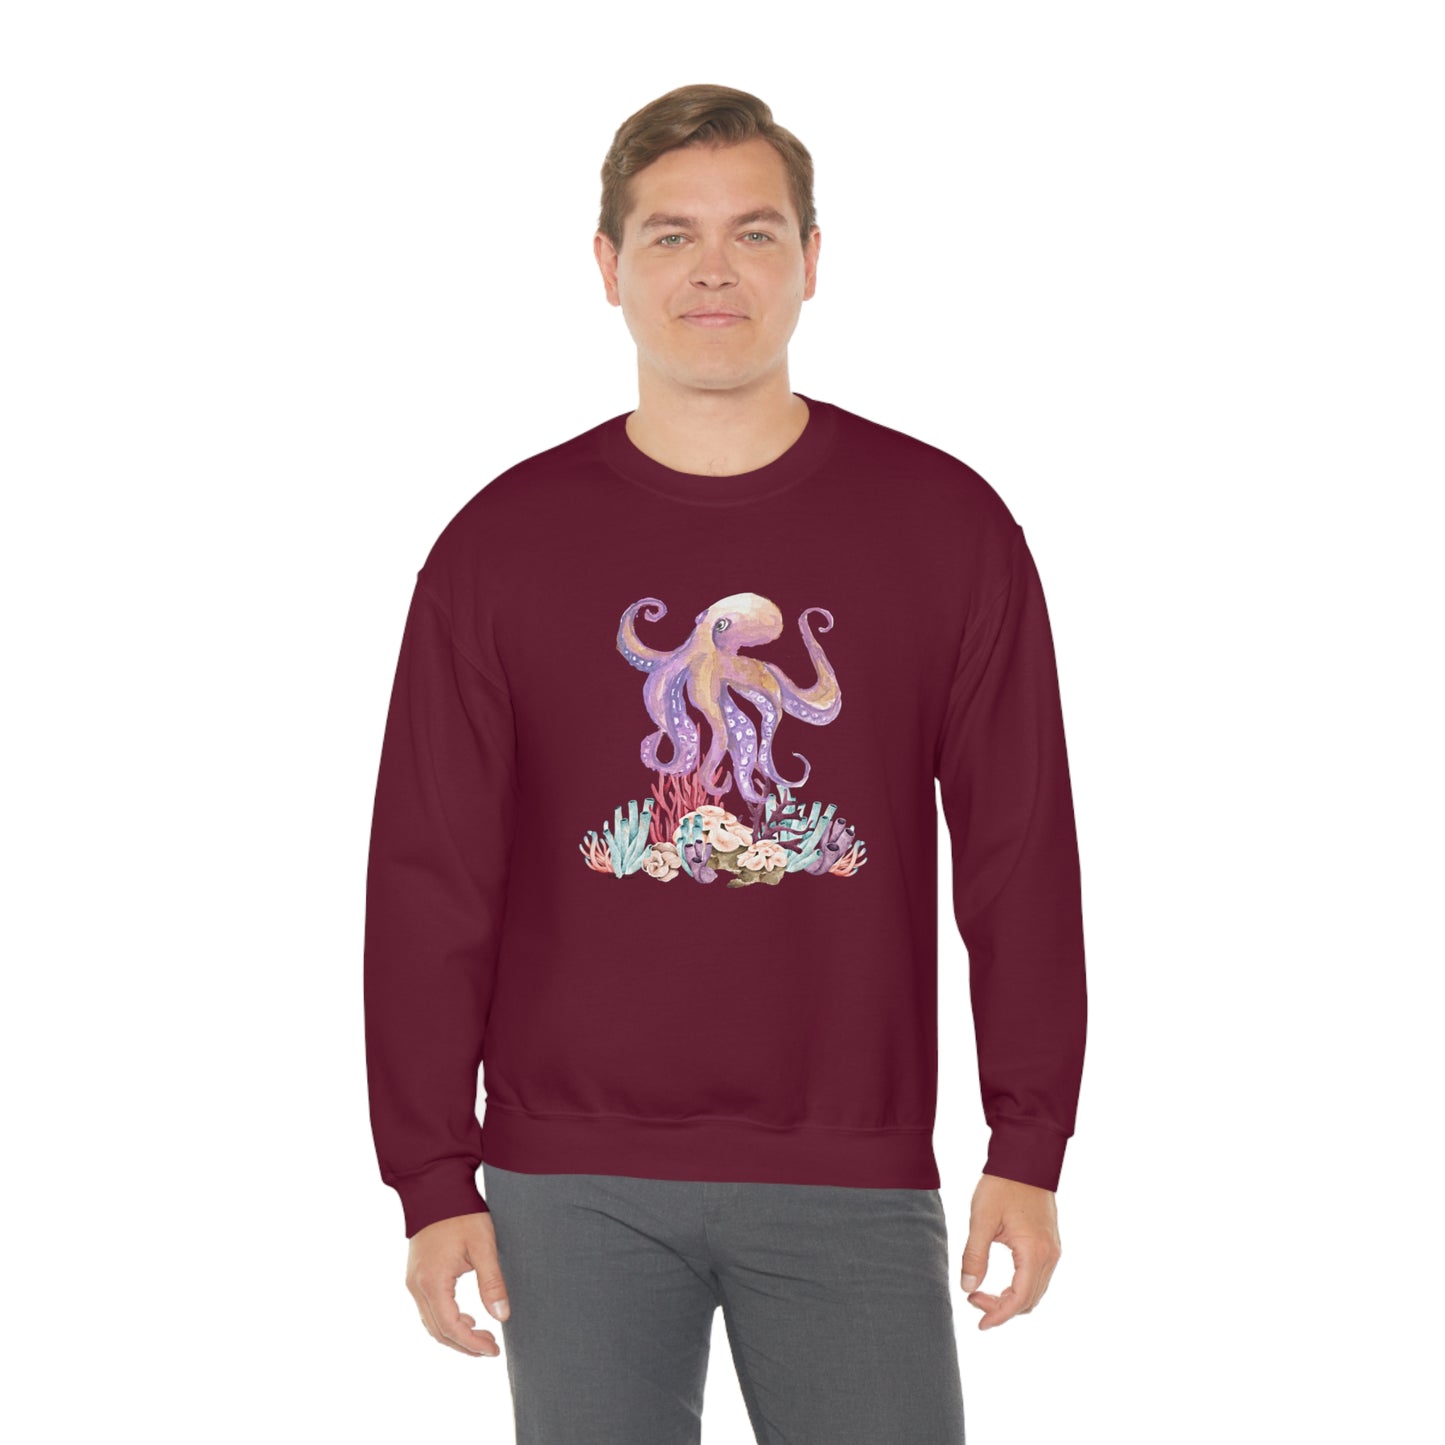 Mock up of a man wearing the Maroon shirt